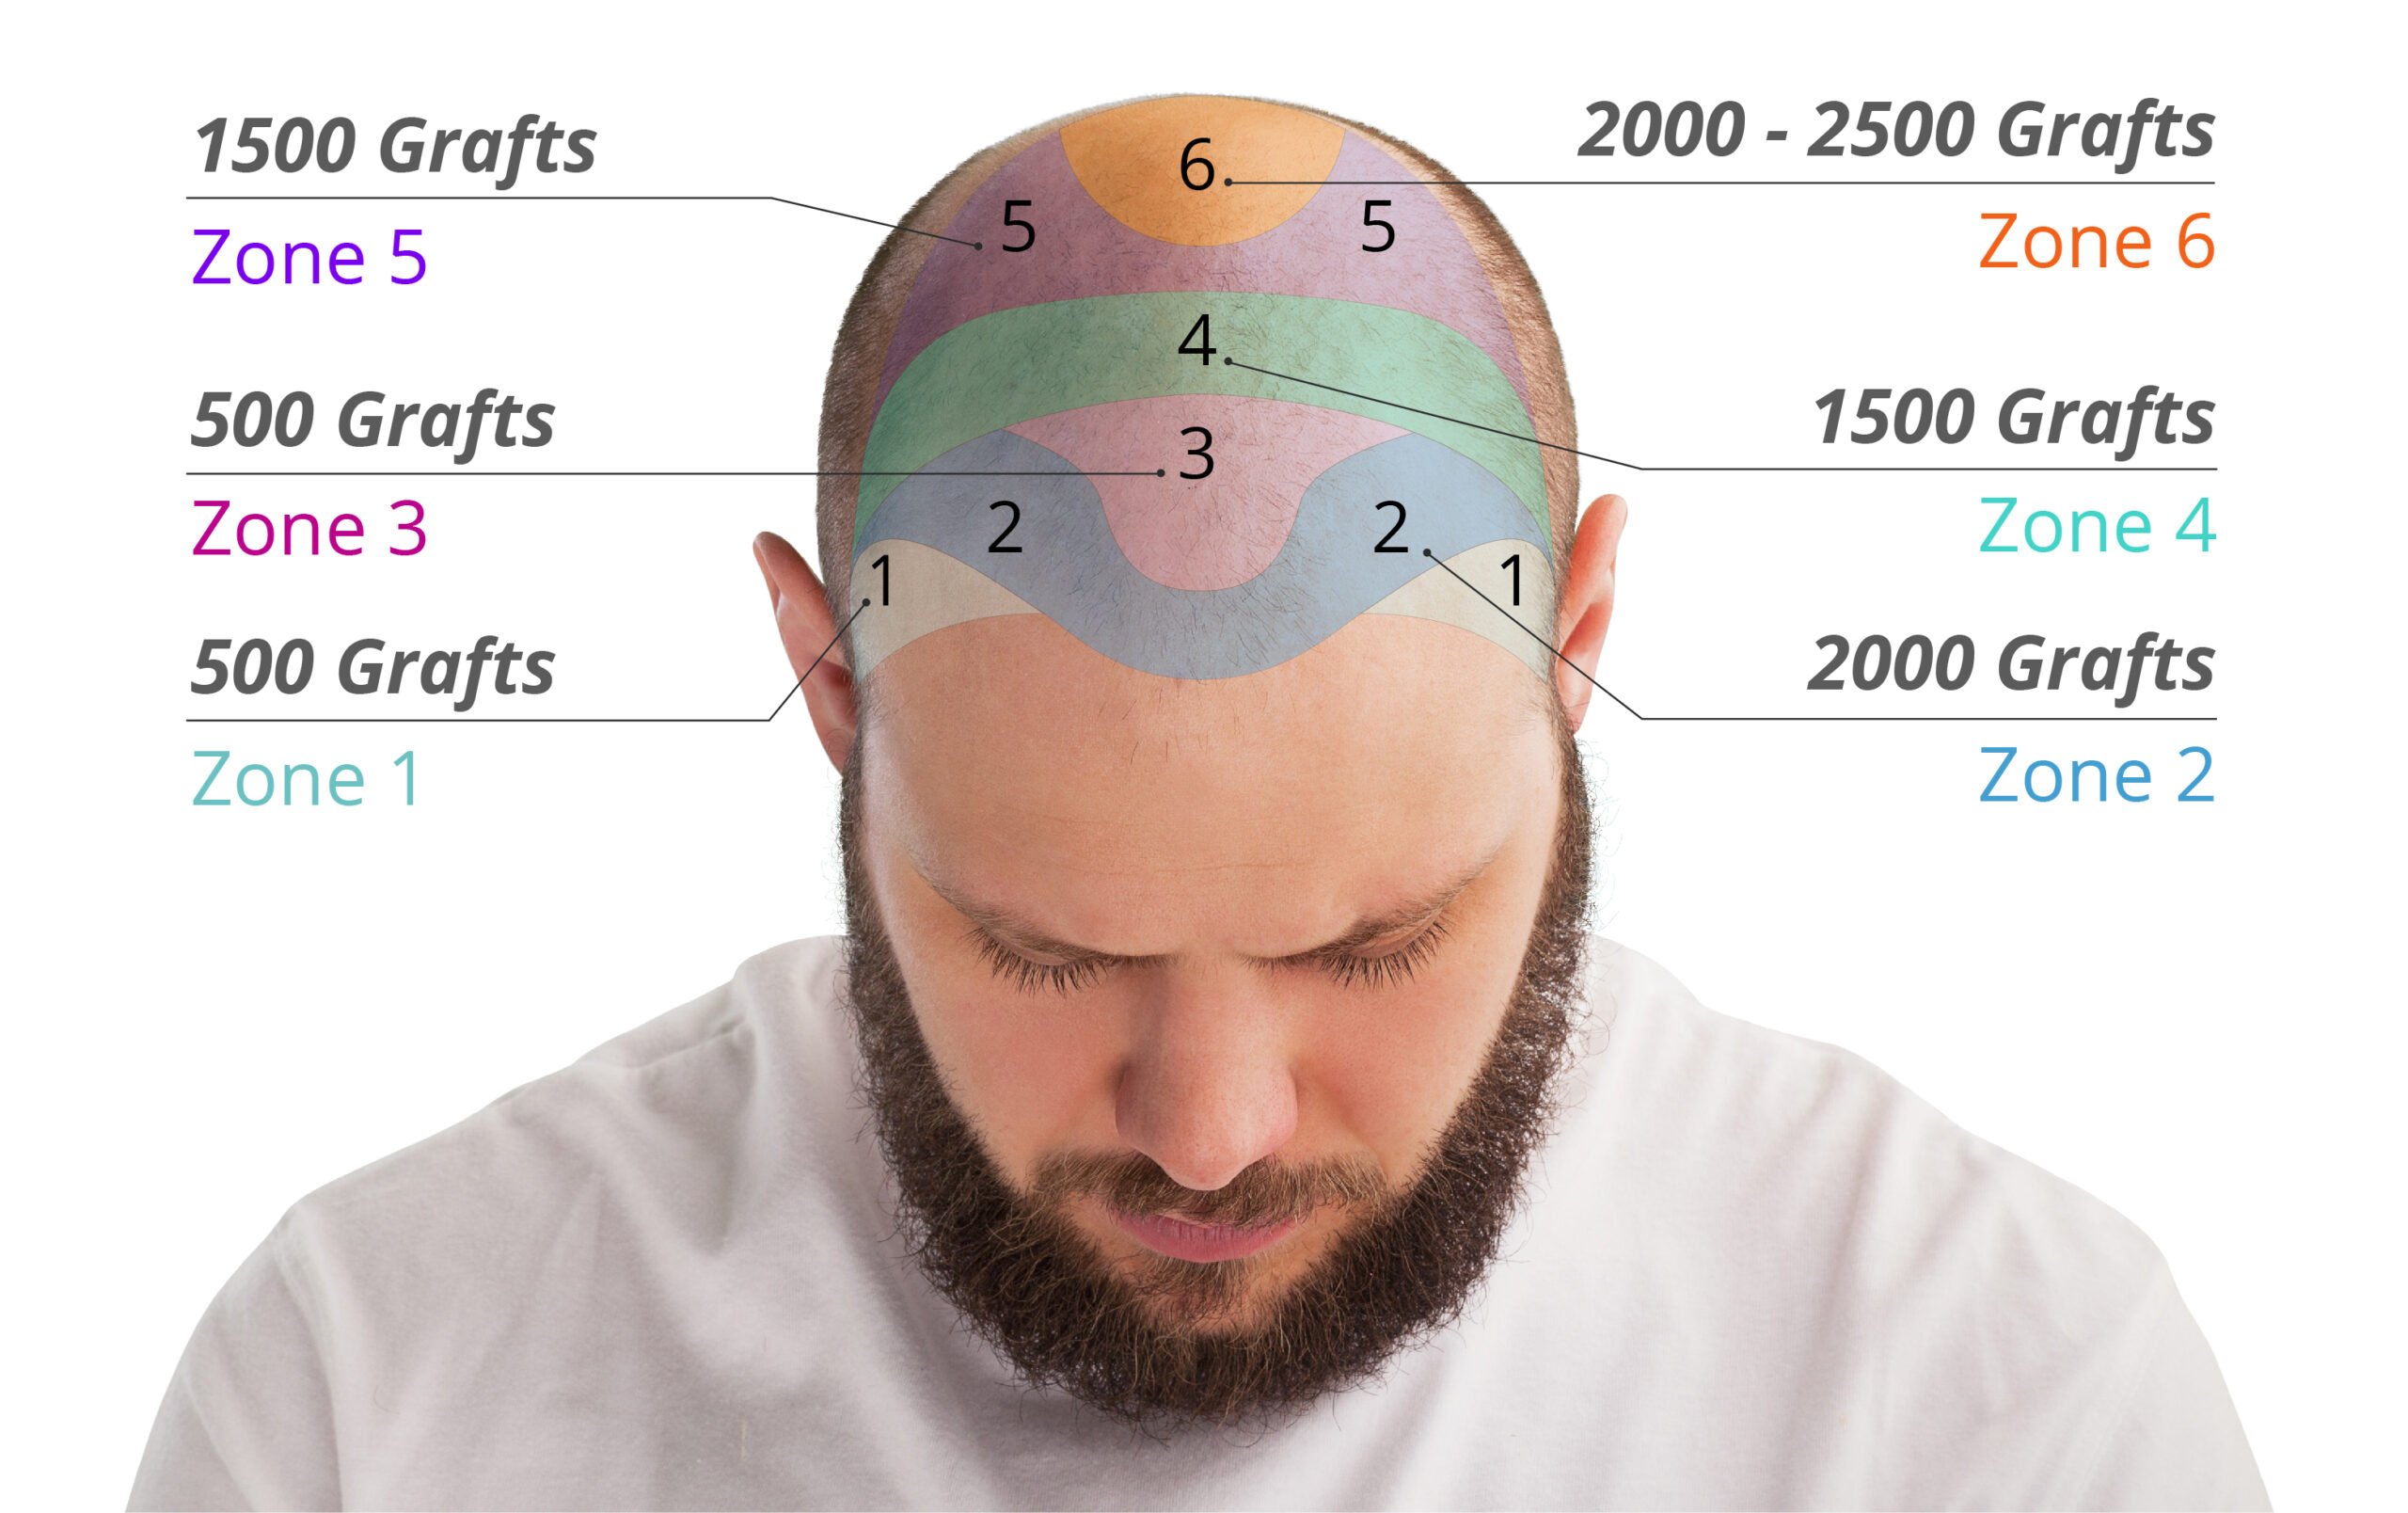 Comparative infographic with the number of grafts in the different areas of the head